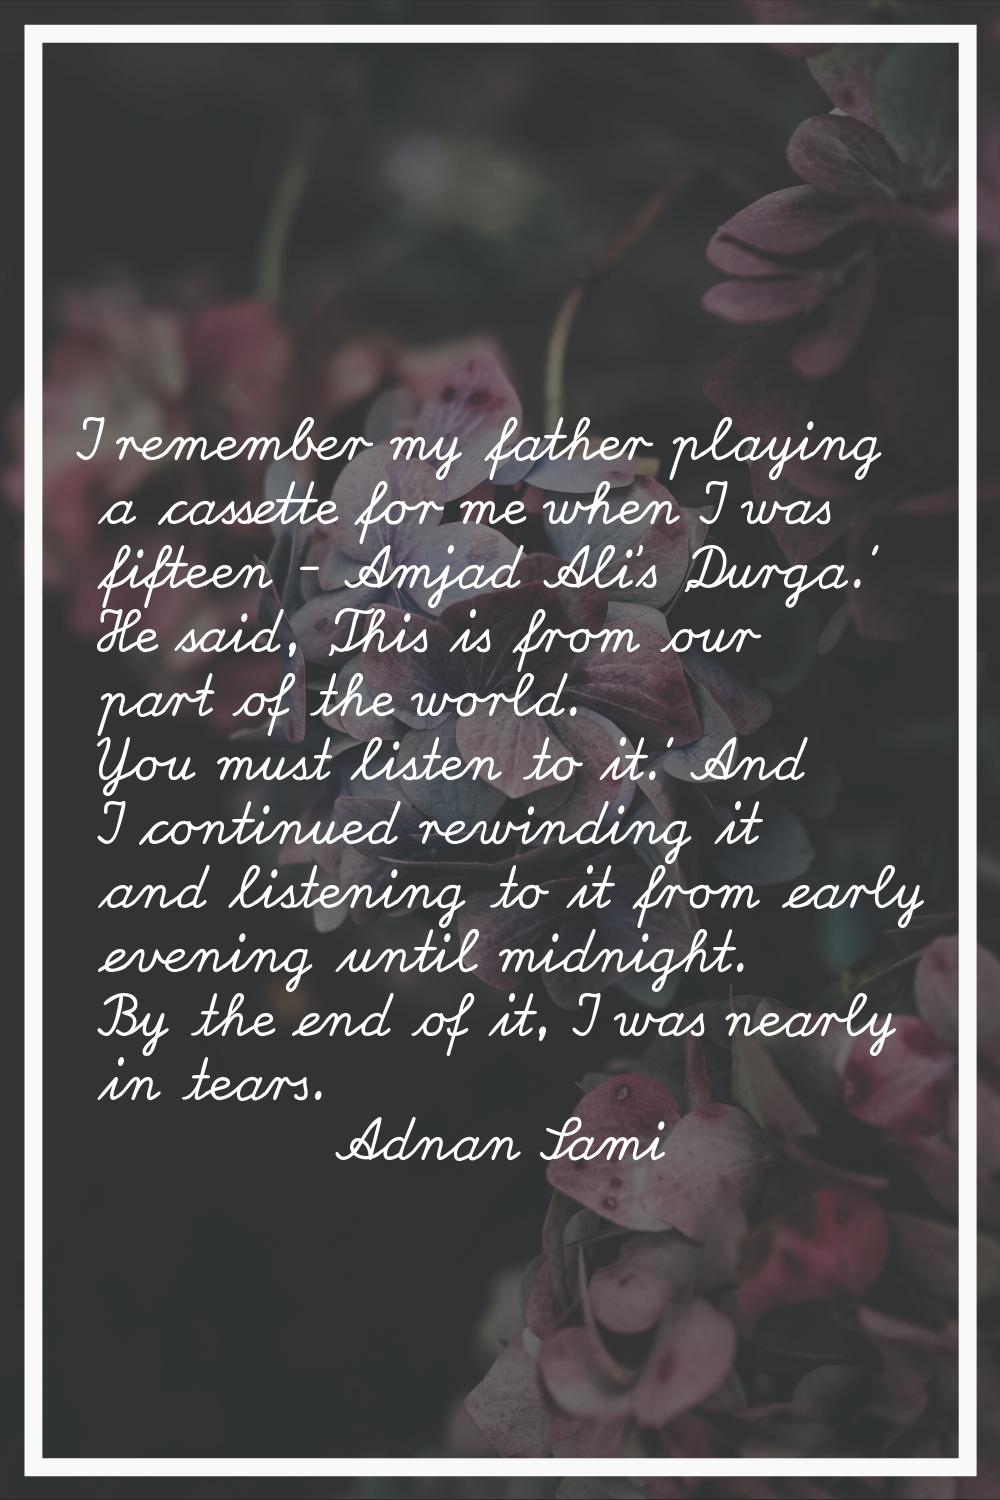 I remember my father playing a cassette for me when I was fifteen - Amjad Ali's 'Durga.' He said, '